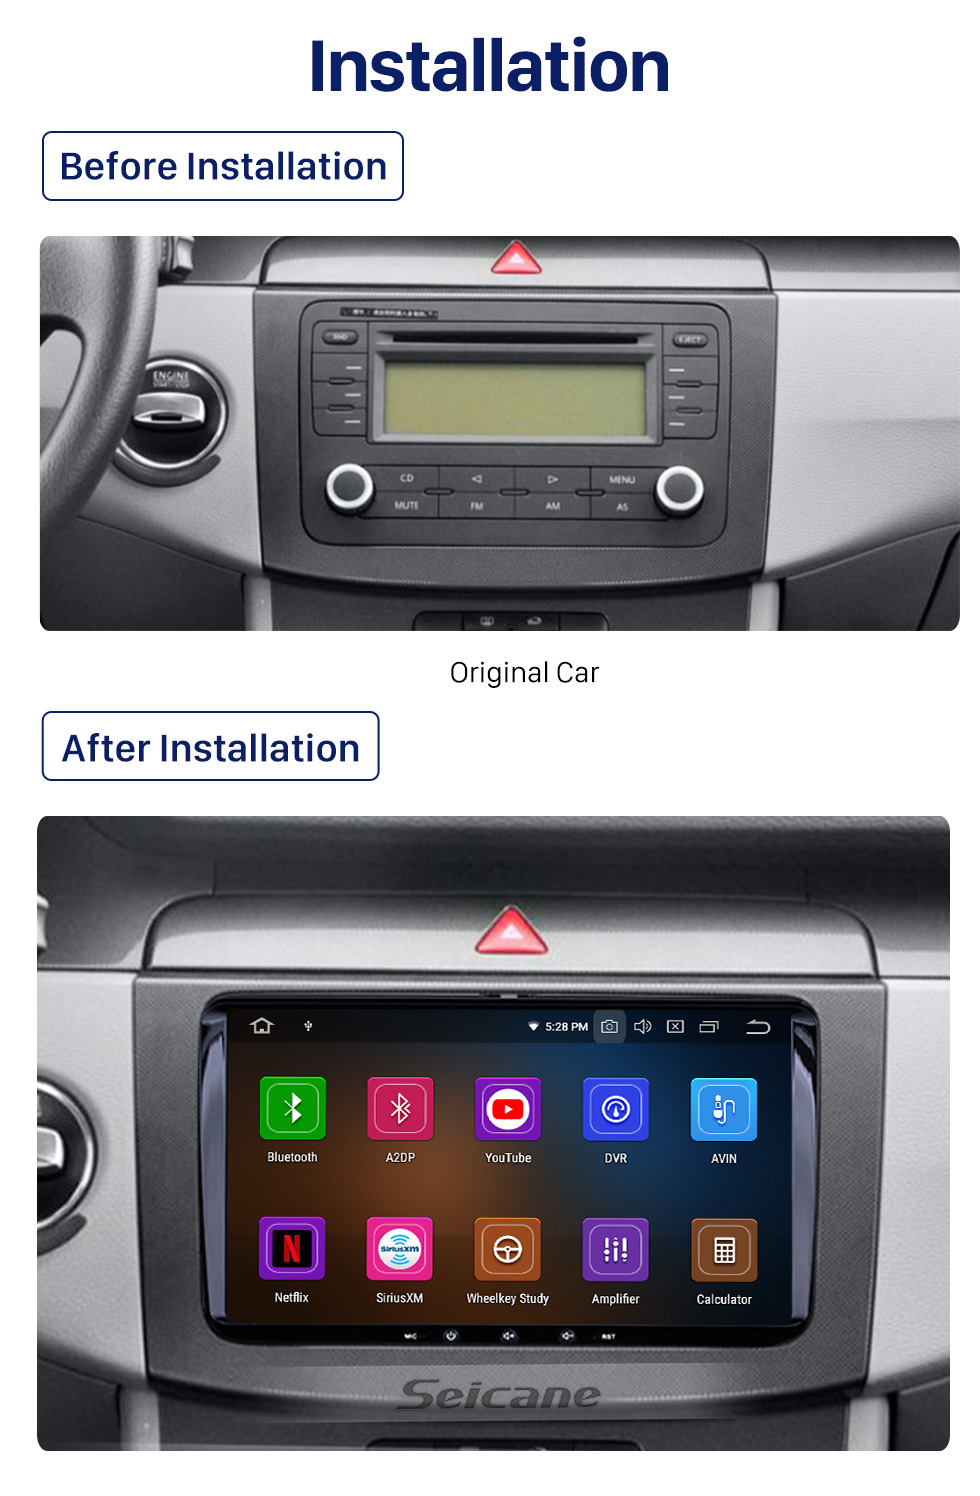 Seicane 9 inch VW Volkswagen Universal SKODA Seat  Android 10.0 HD touchscreen Radio GPS Navigation with Bluetooth WIFI 1080P USB Mirror Link DVR Rearview Camera